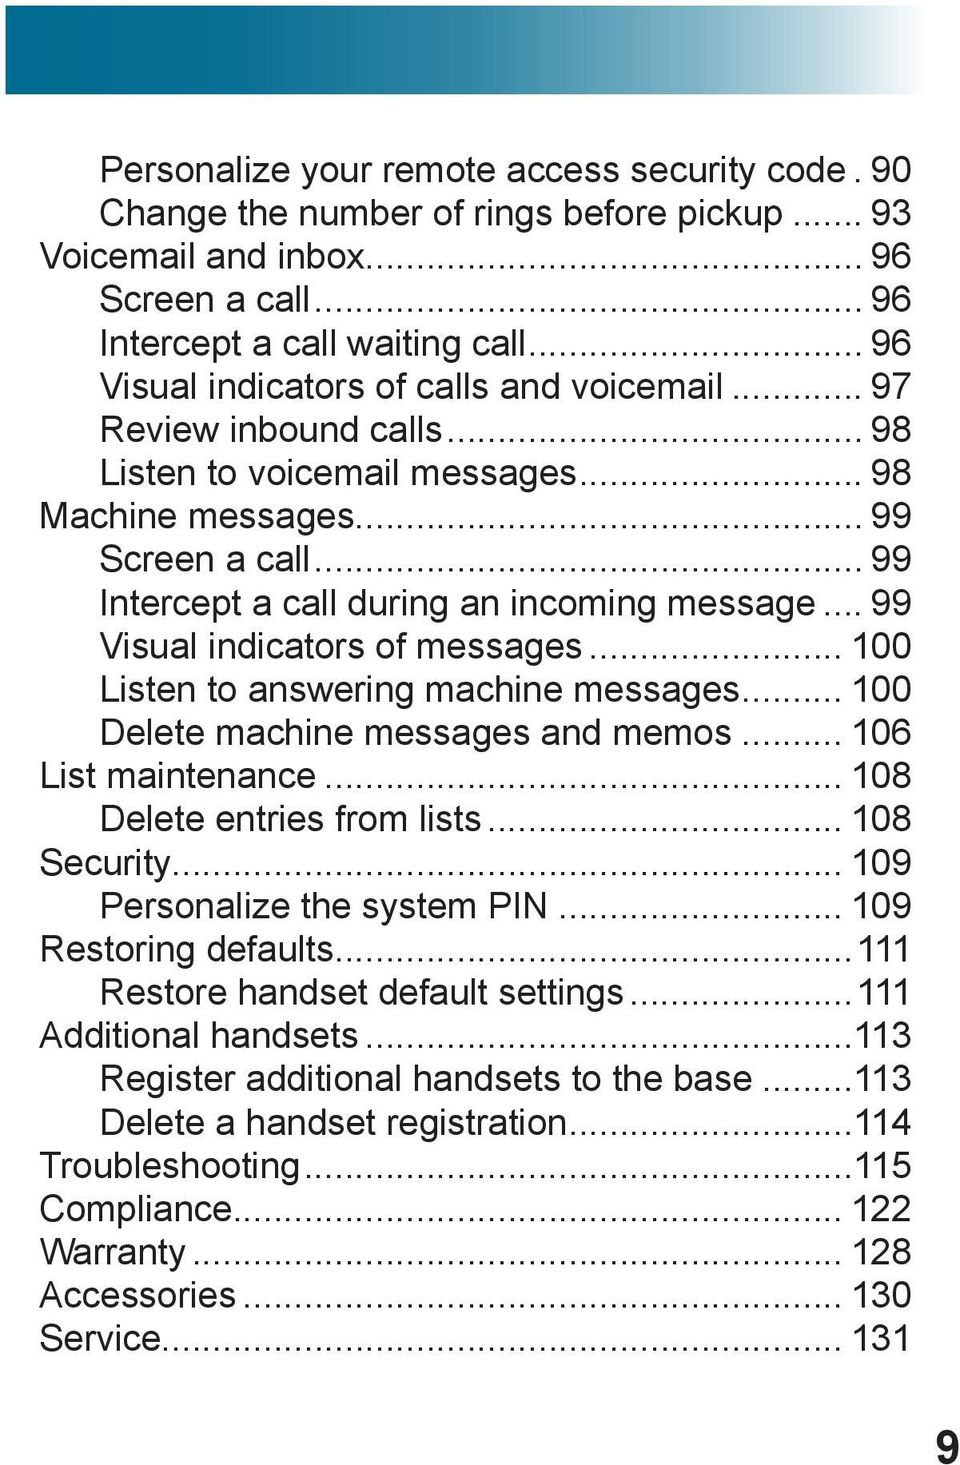 .. 99 Visual indicators of messages... 100 Listen to answering machine messages... 100 Delete machine messages and memos... 106 List maintenance... 108 Delete entries from lists... 108 Security.